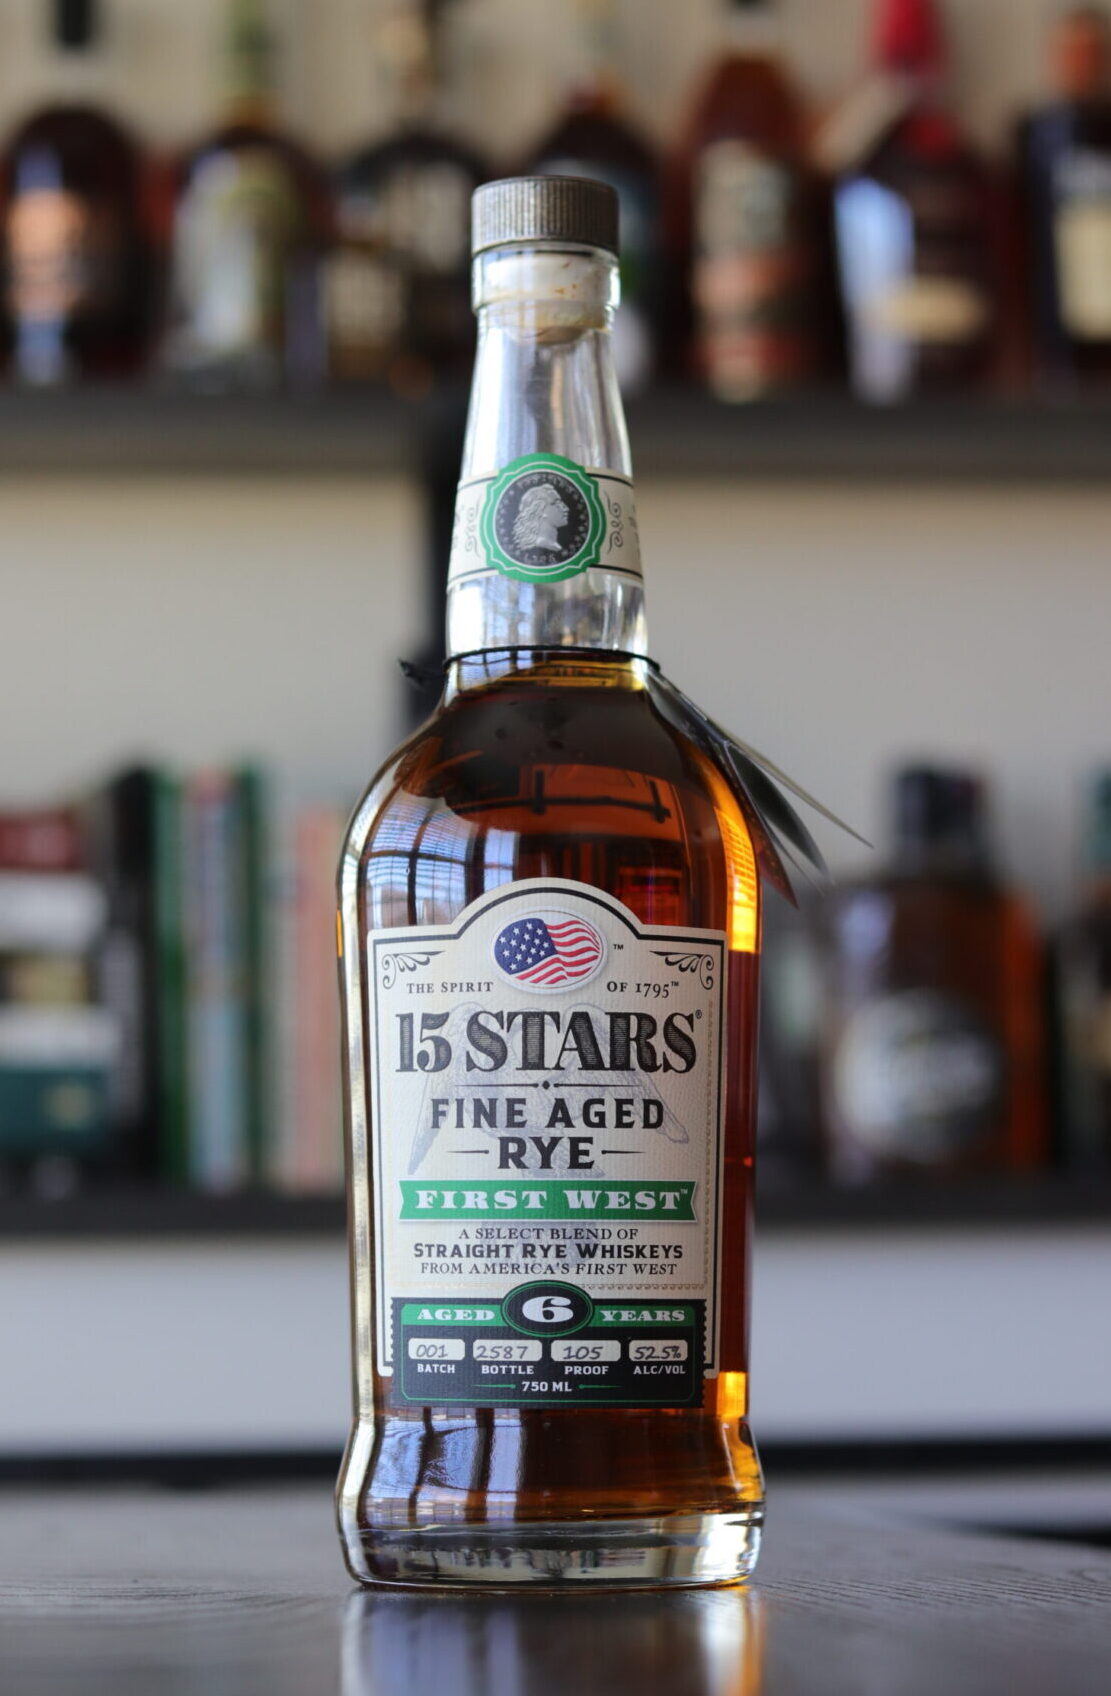 Reviewing ‘First West Rye Whiskey’ by 15 STARS